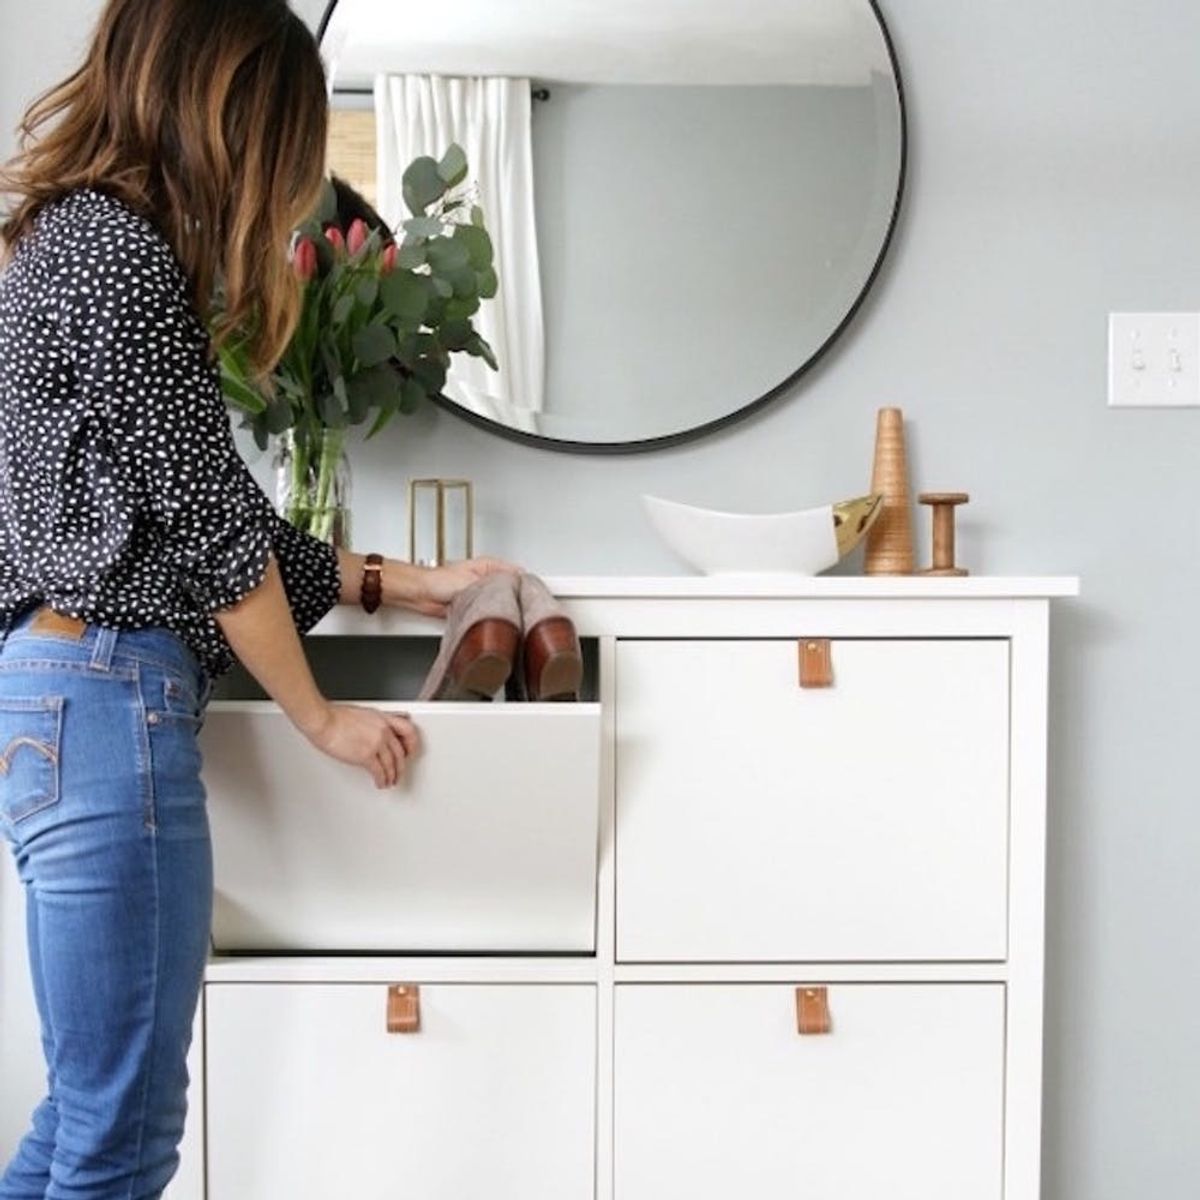 11 DIY Leather Pull Hacks to Instantly Upgrade Your IKEA Cabinets